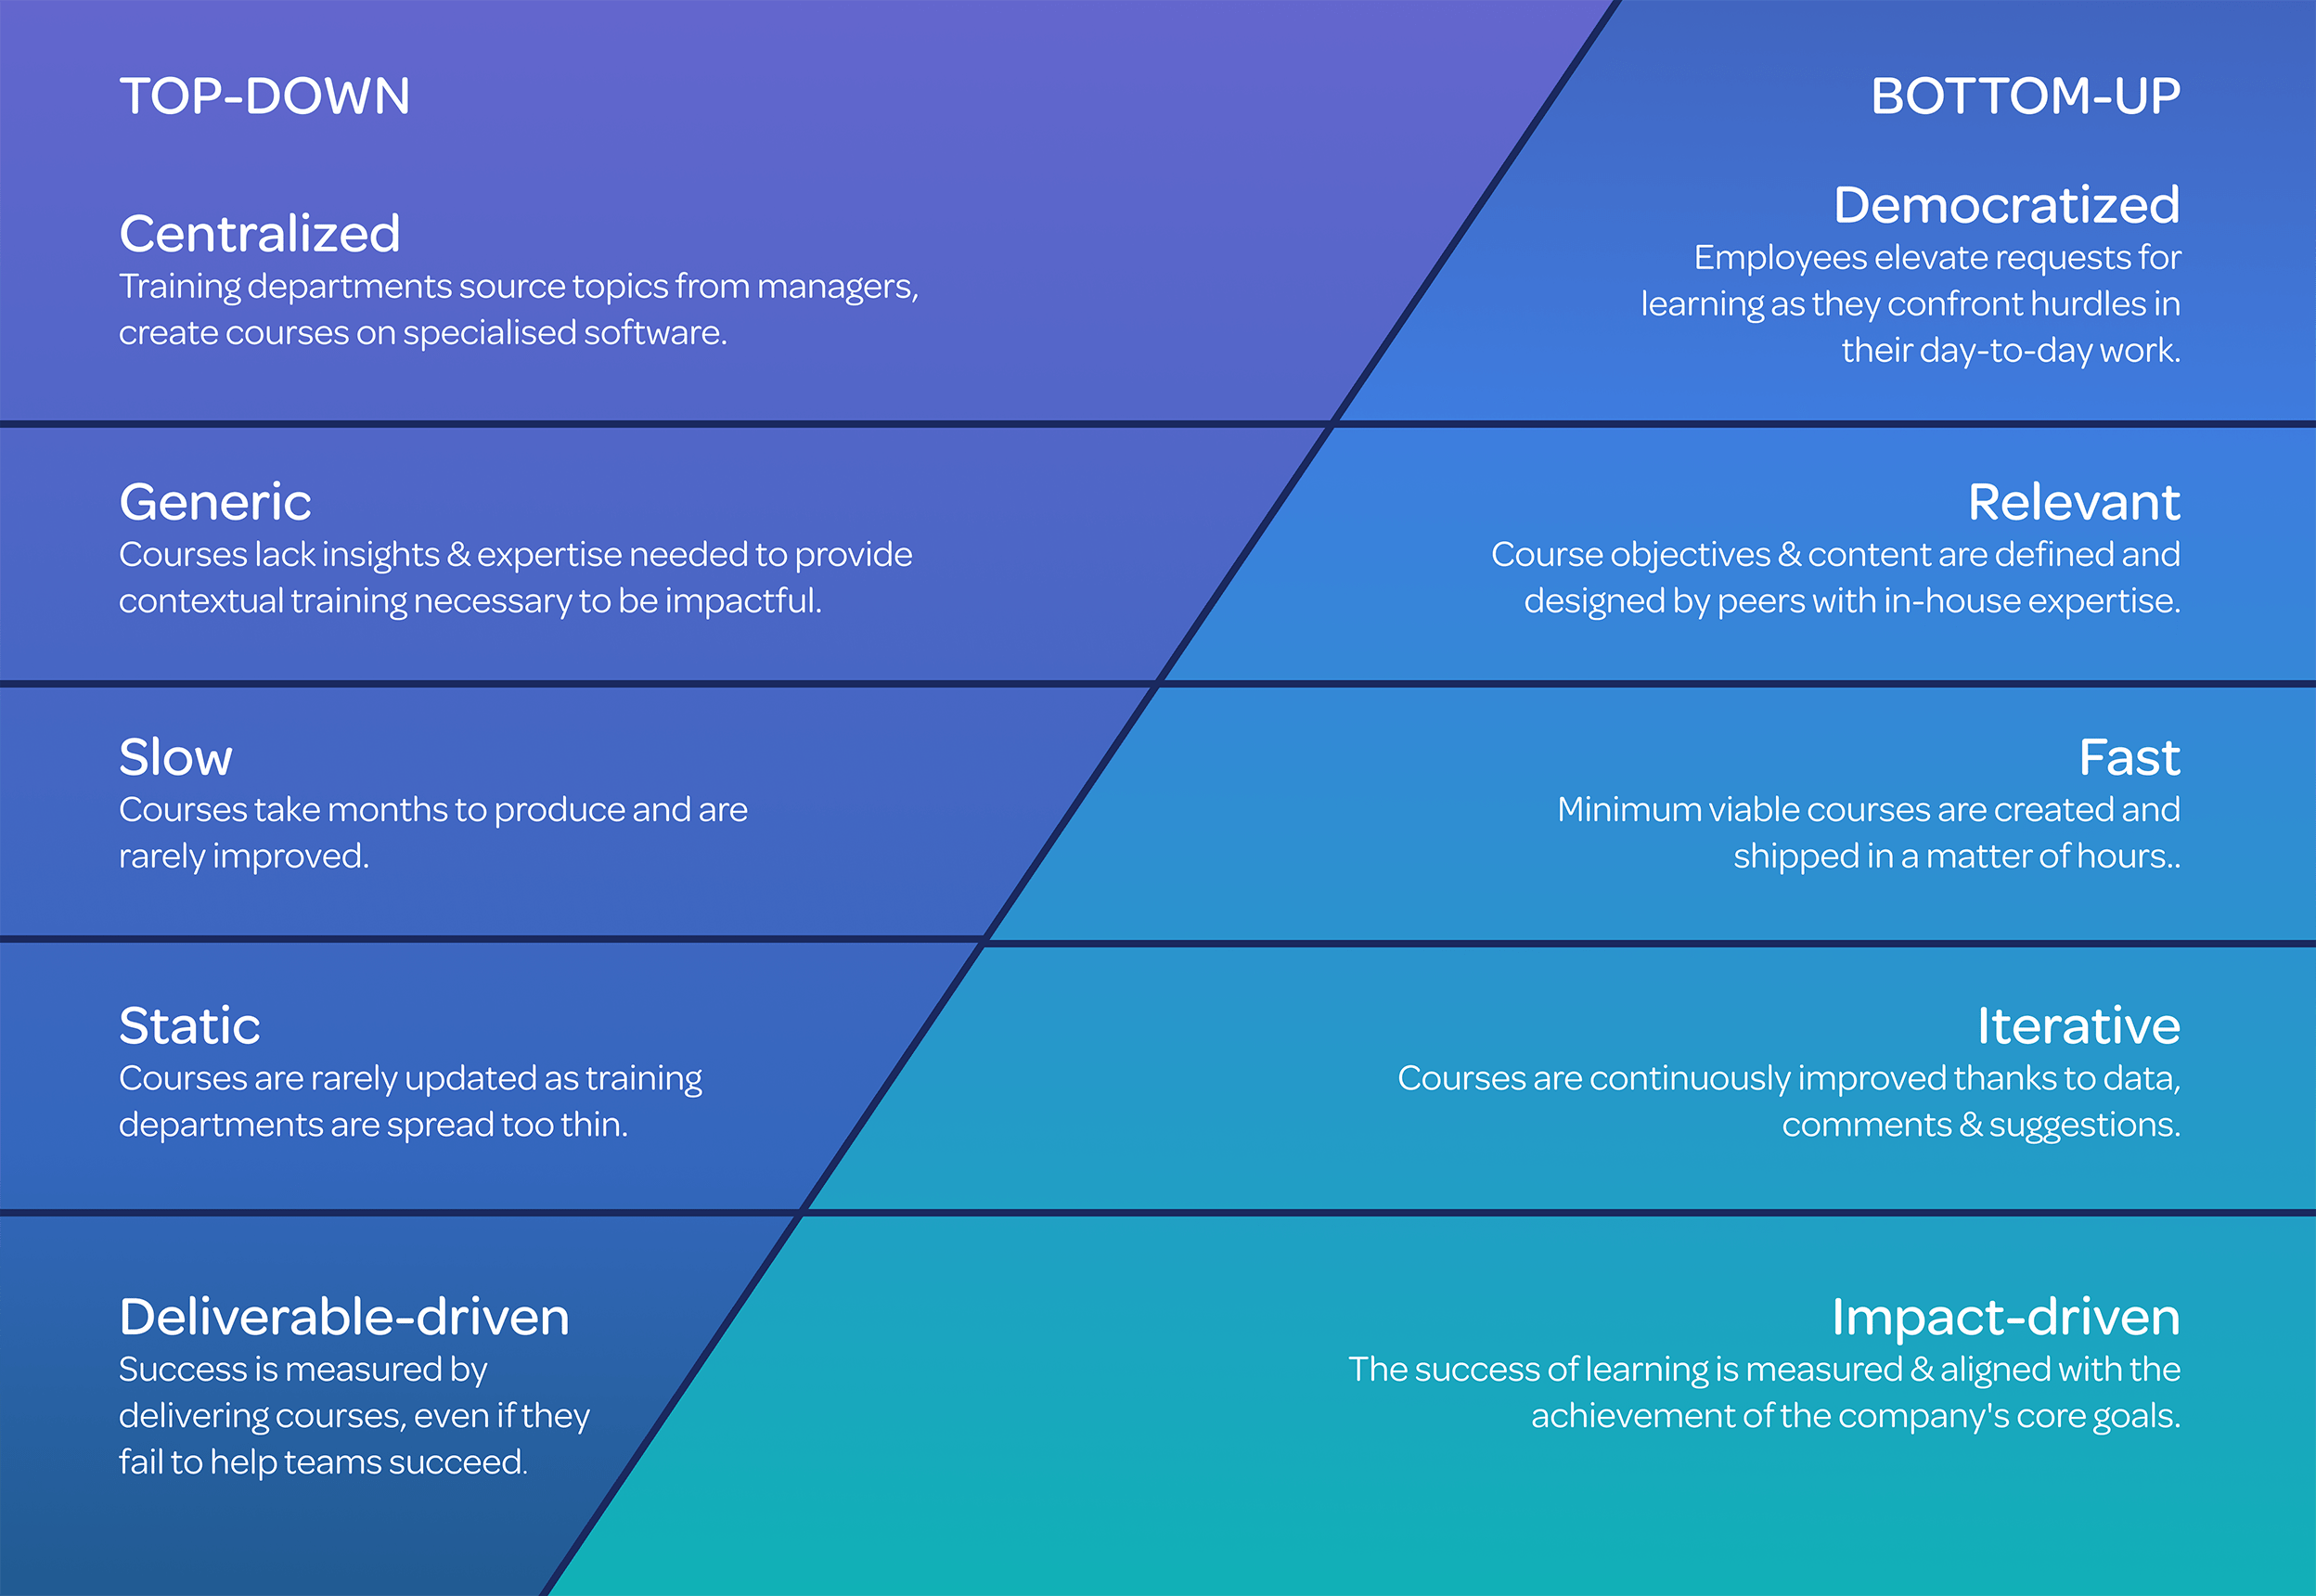 decentralized bottom-up learning